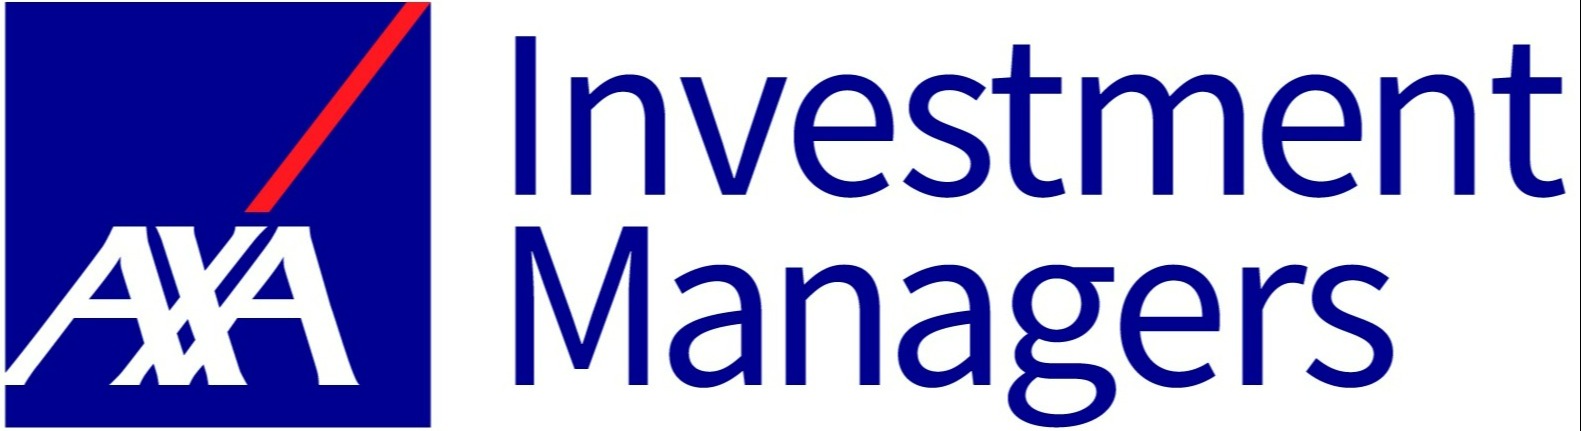 Logo for AXA Investment Managers